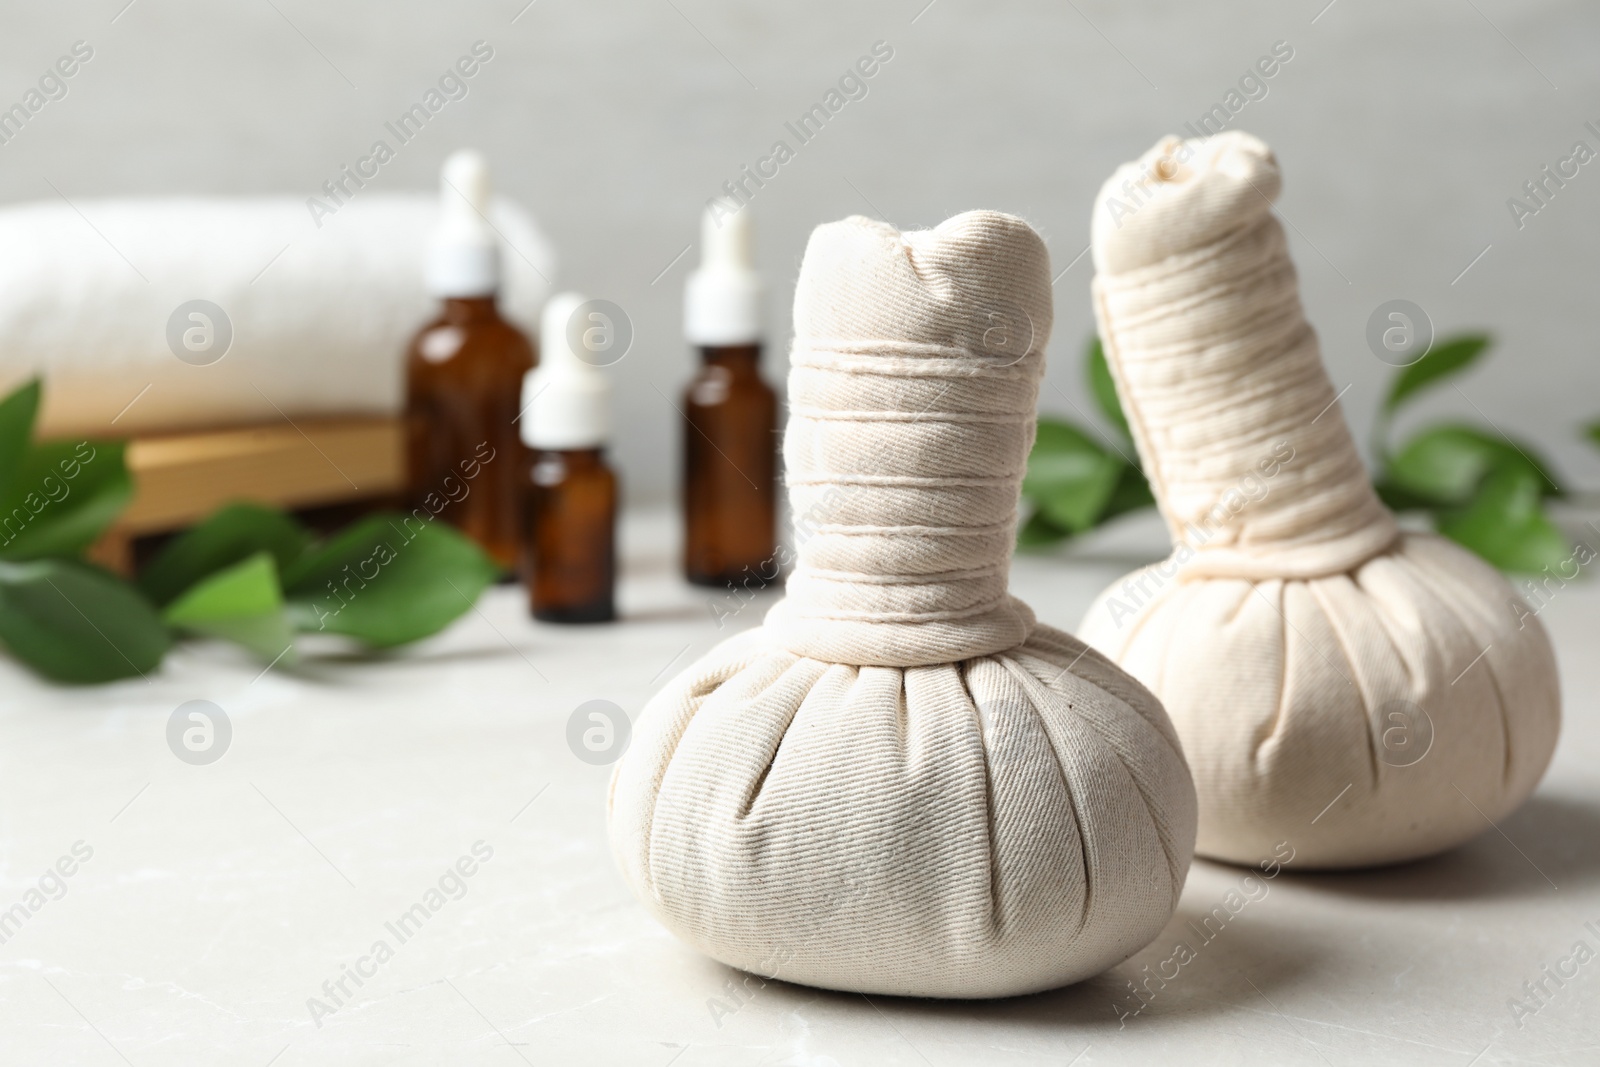 Photo of Herbal bags for spa massage on table